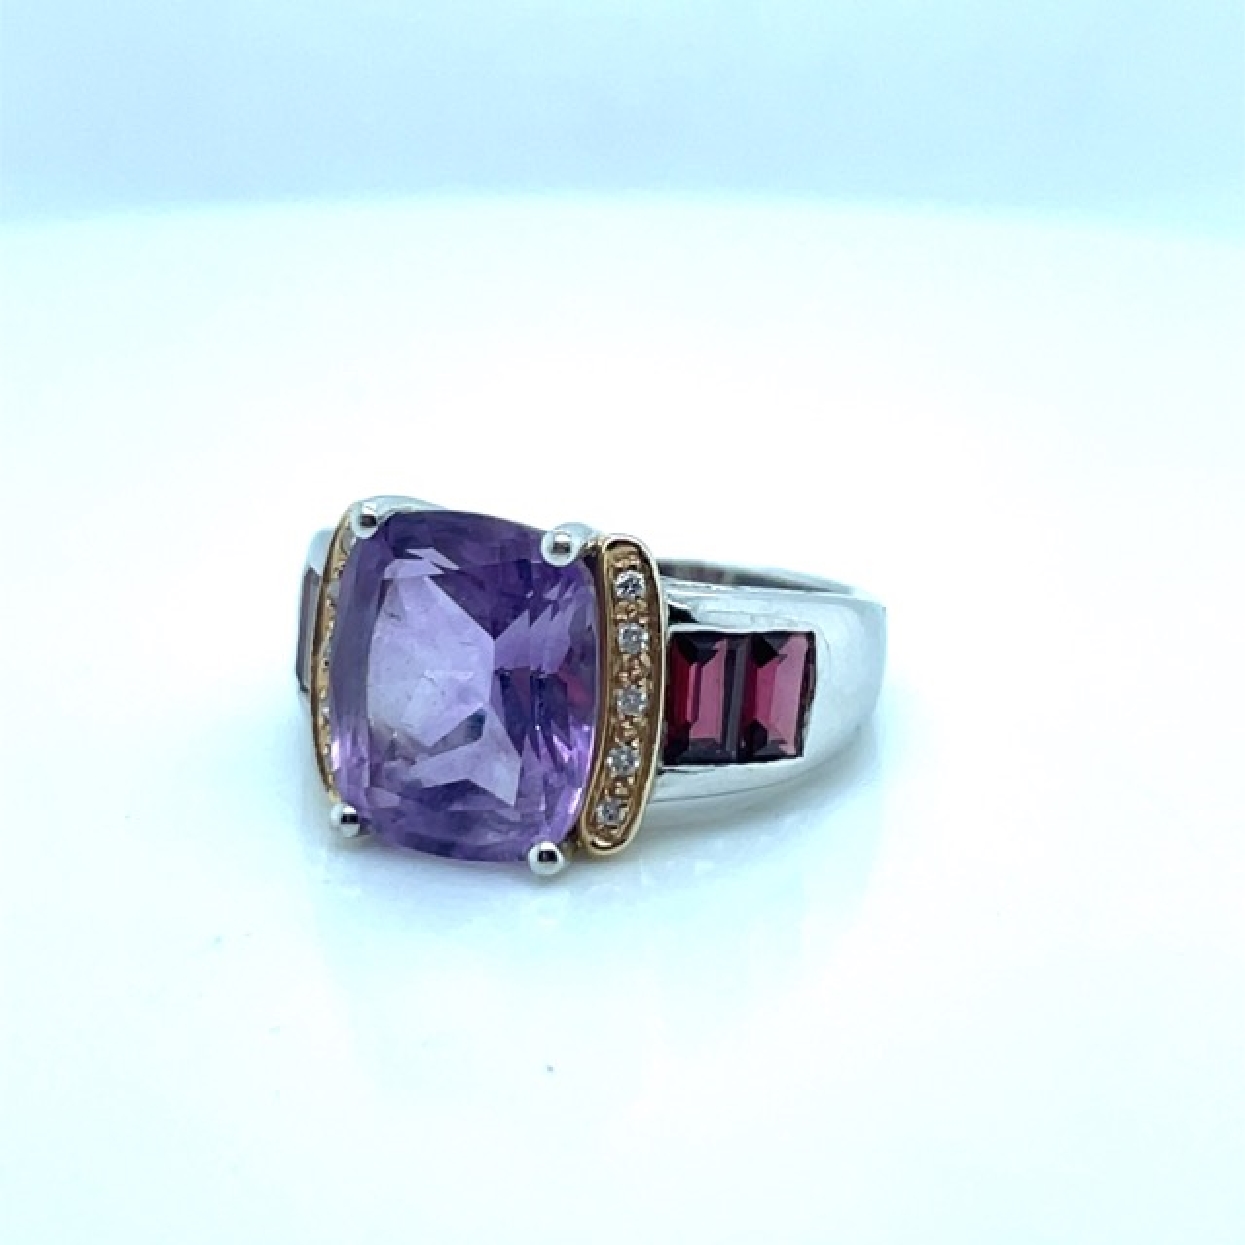 14K White Gold Amethyst Ring with Tourmaline and Diamond Accents 
Size 7